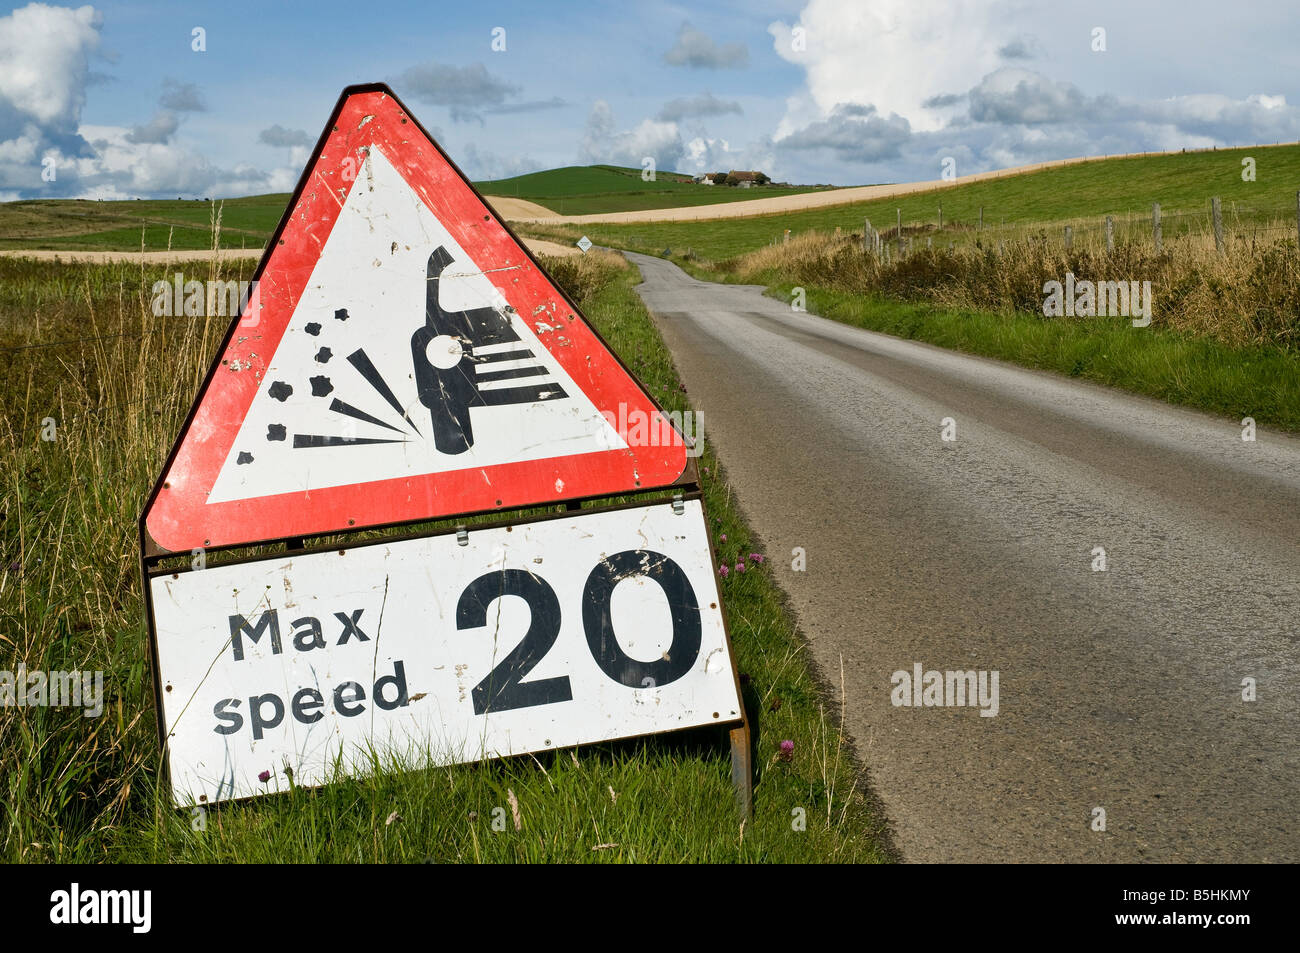 dh Roadsign ROAD UK Lose road chippings warning sign 20 mph max speed red triangle Stock Photo